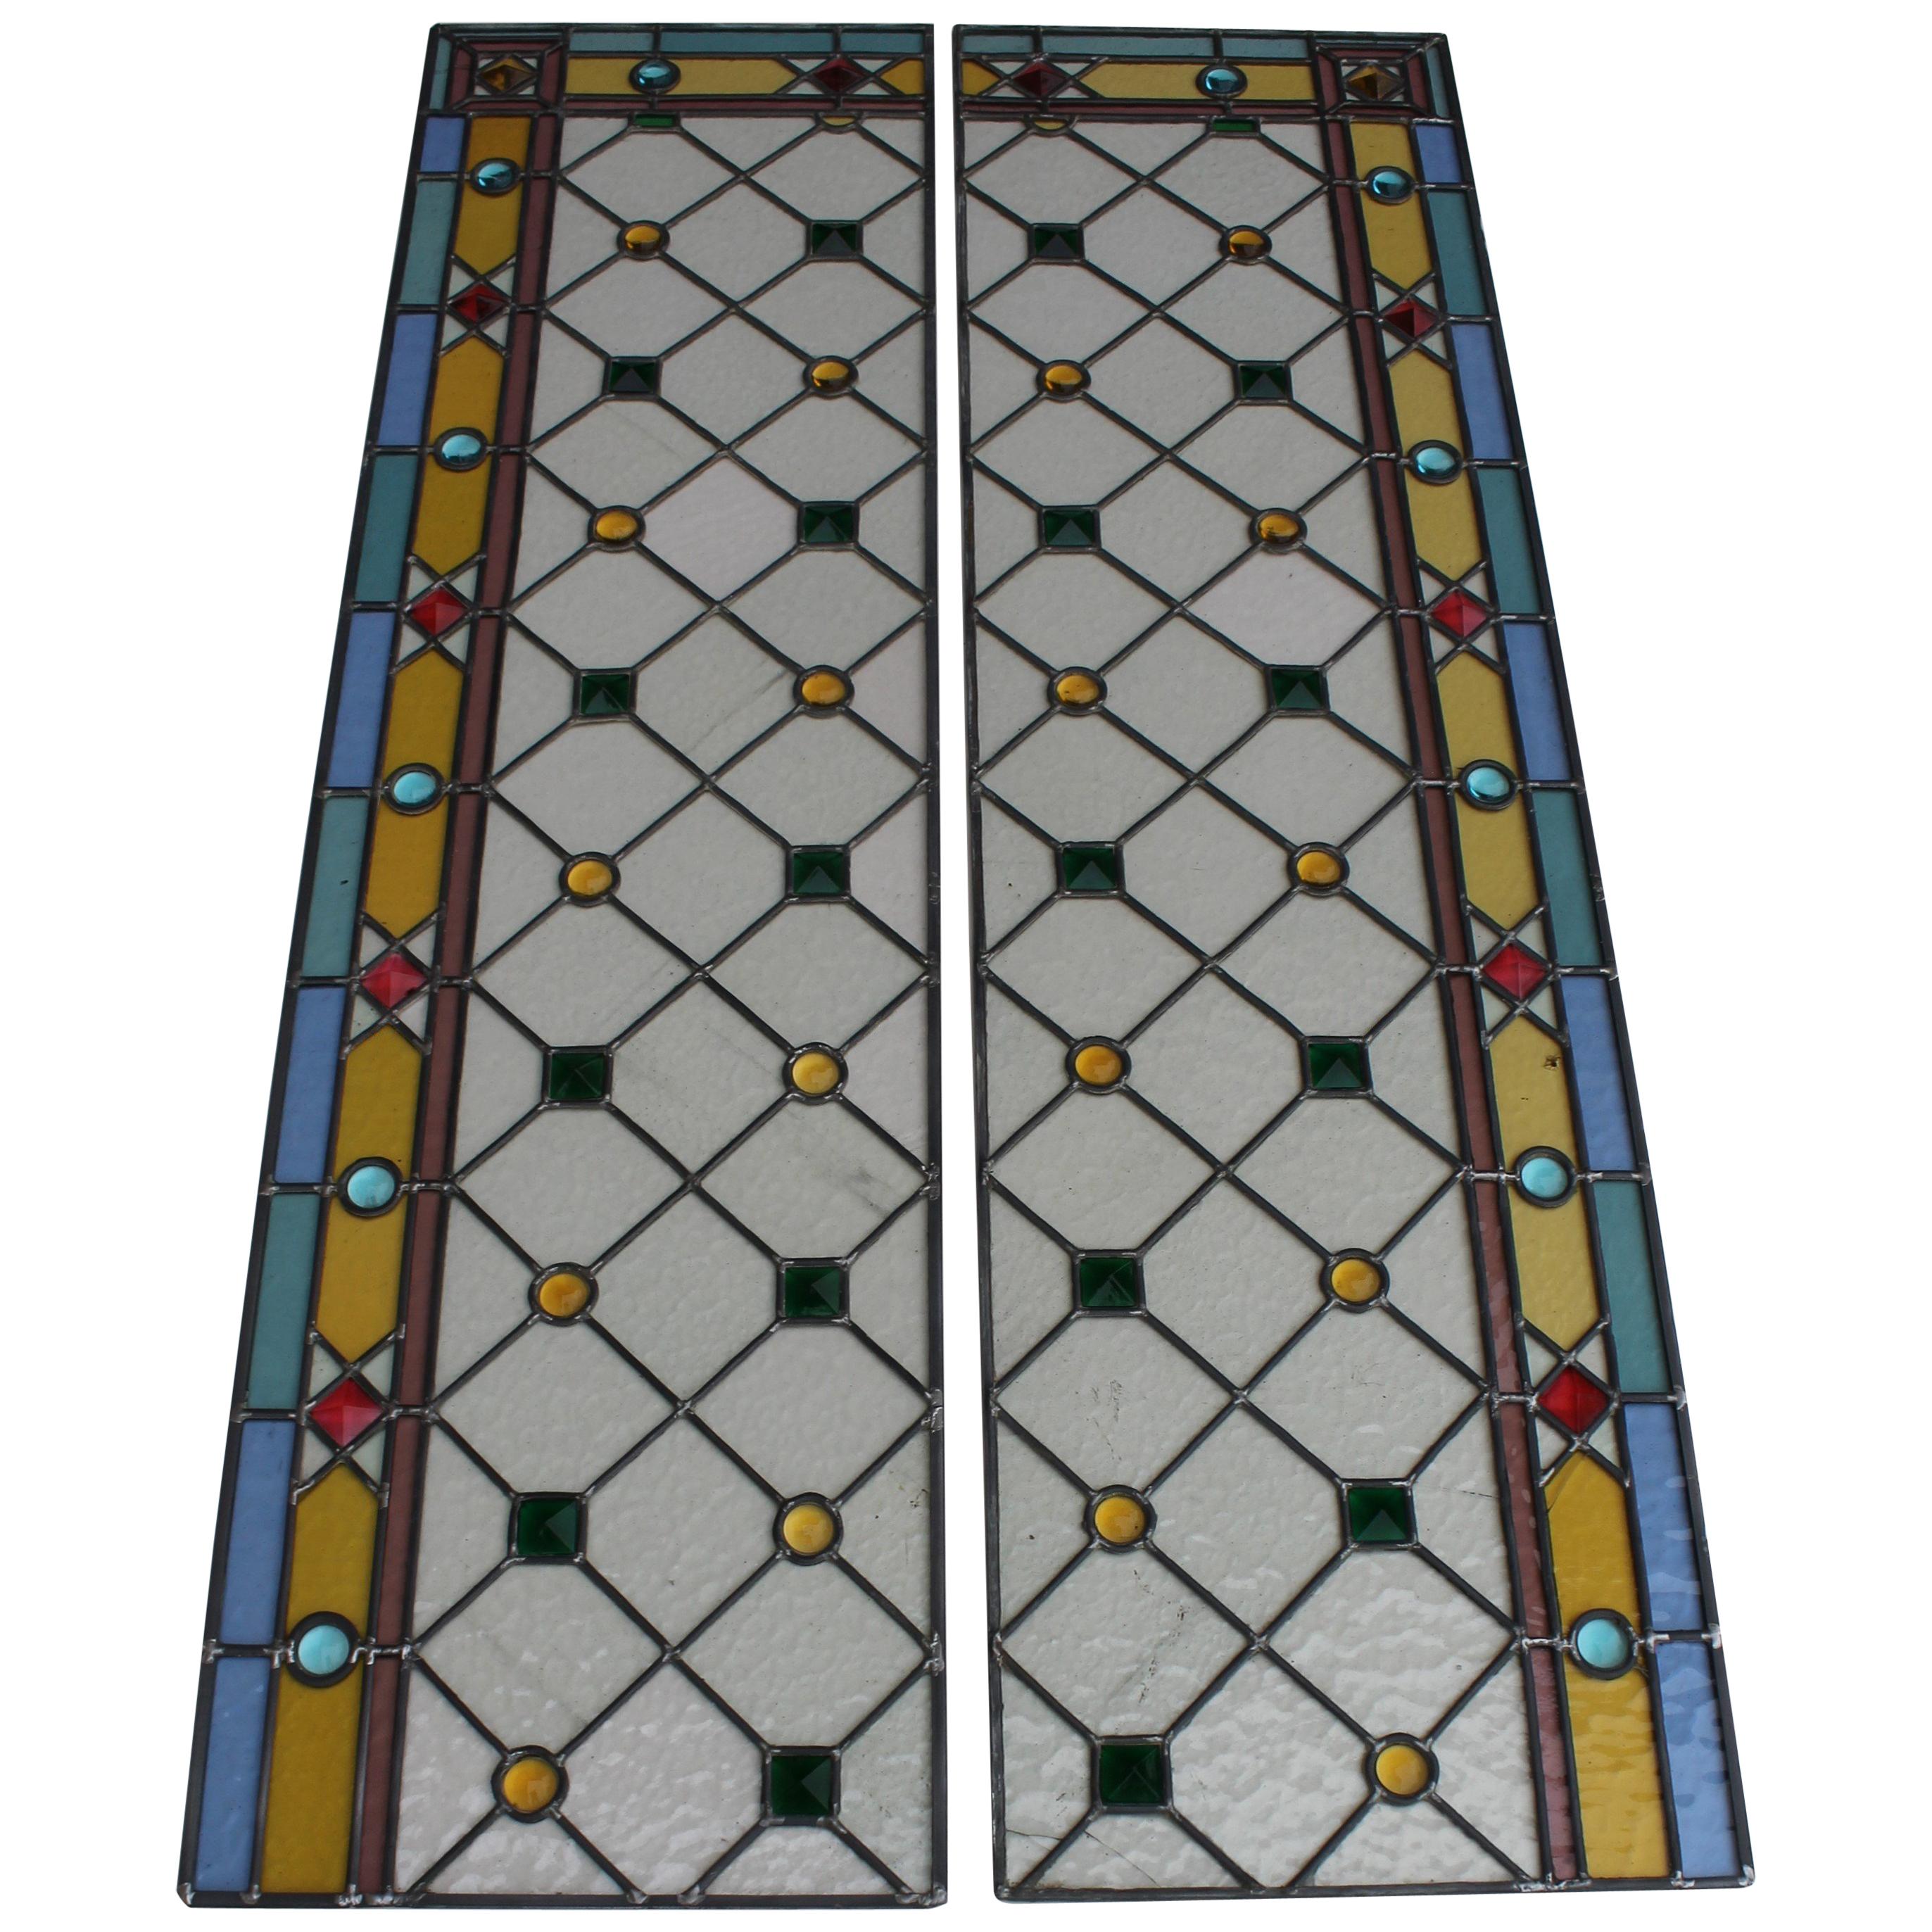 Pair of Art Deco Italian Stained Glass Panels, 1935 circa.